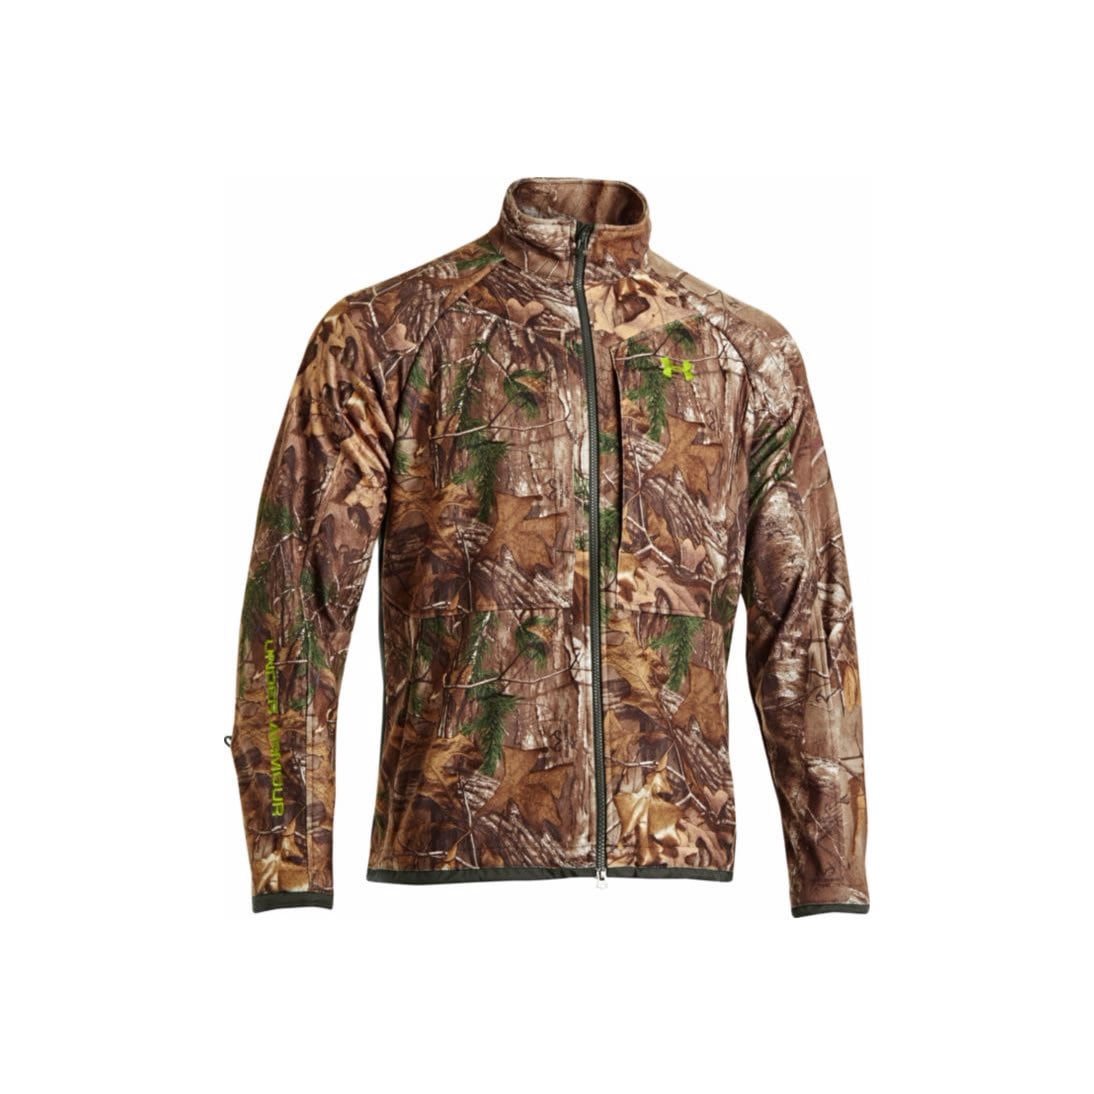 Under Armour ColdGear Infrared Scent Control Rut Realtree Ap Xtra